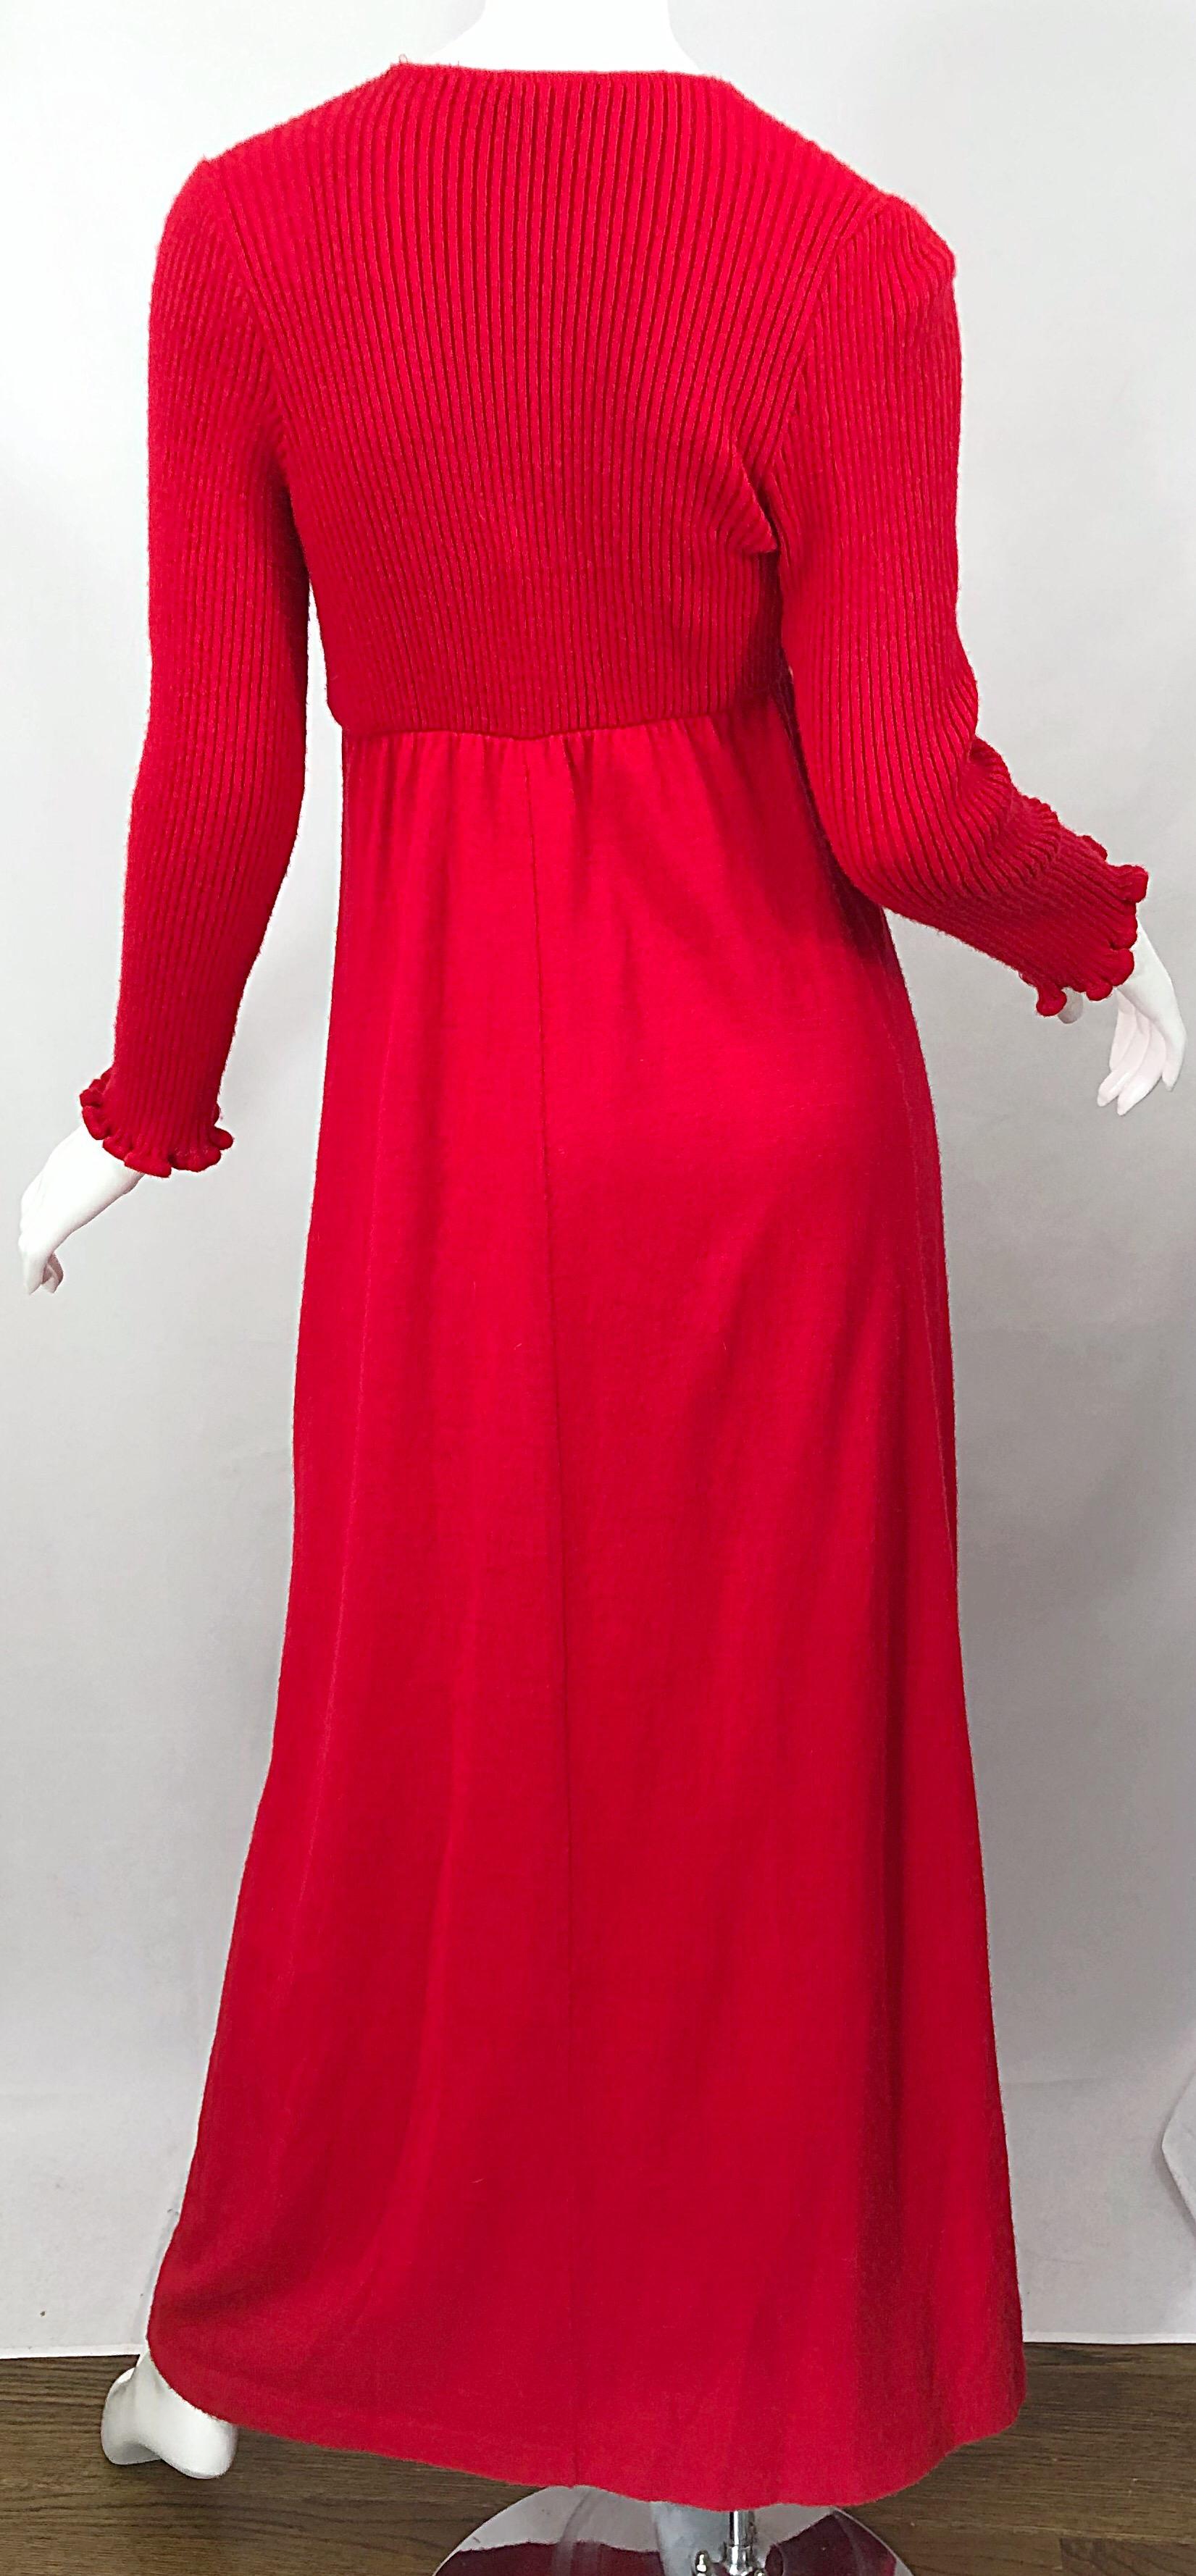 Vintage Joseph Magnin 1970s Lipstick Red Long Sleeve Wool 70s Sweater Maxi Dress For Sale 3